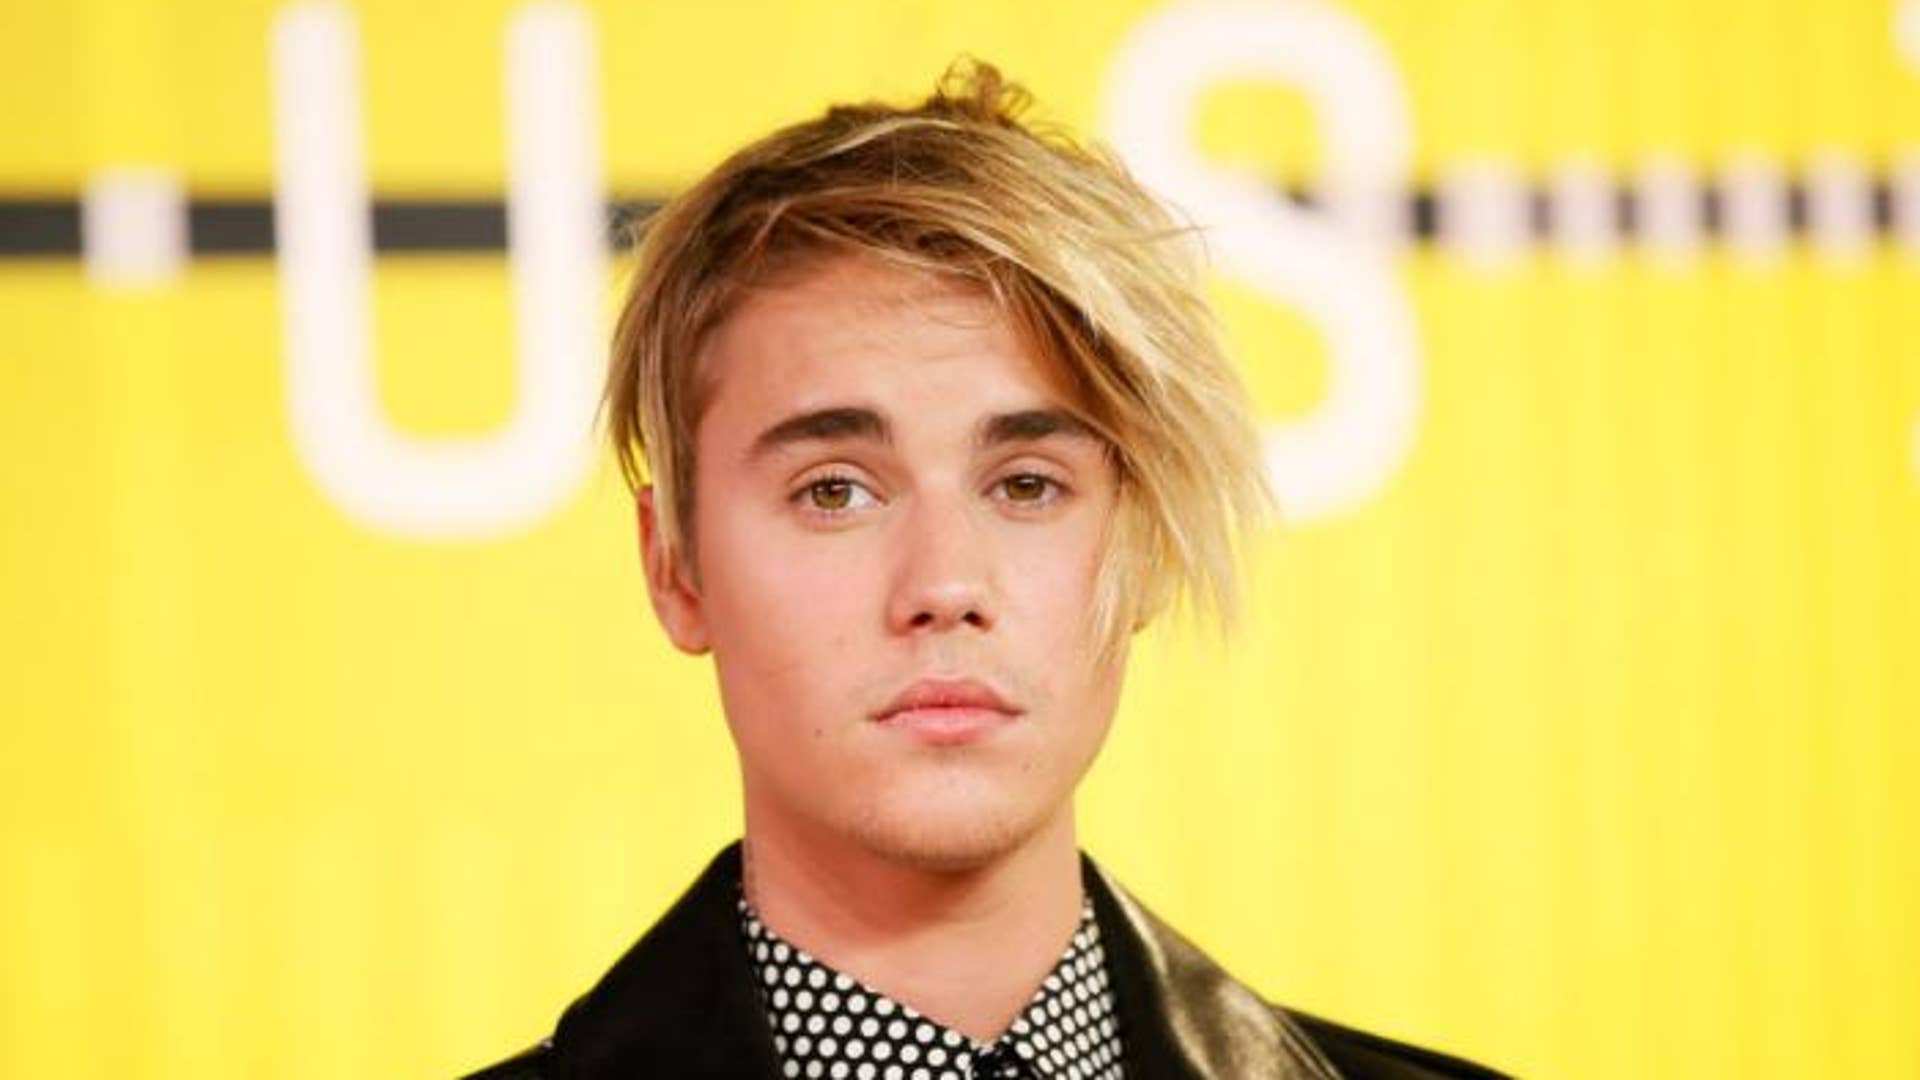 Justin Bieber's haircuts and how to achieve them | British GQ